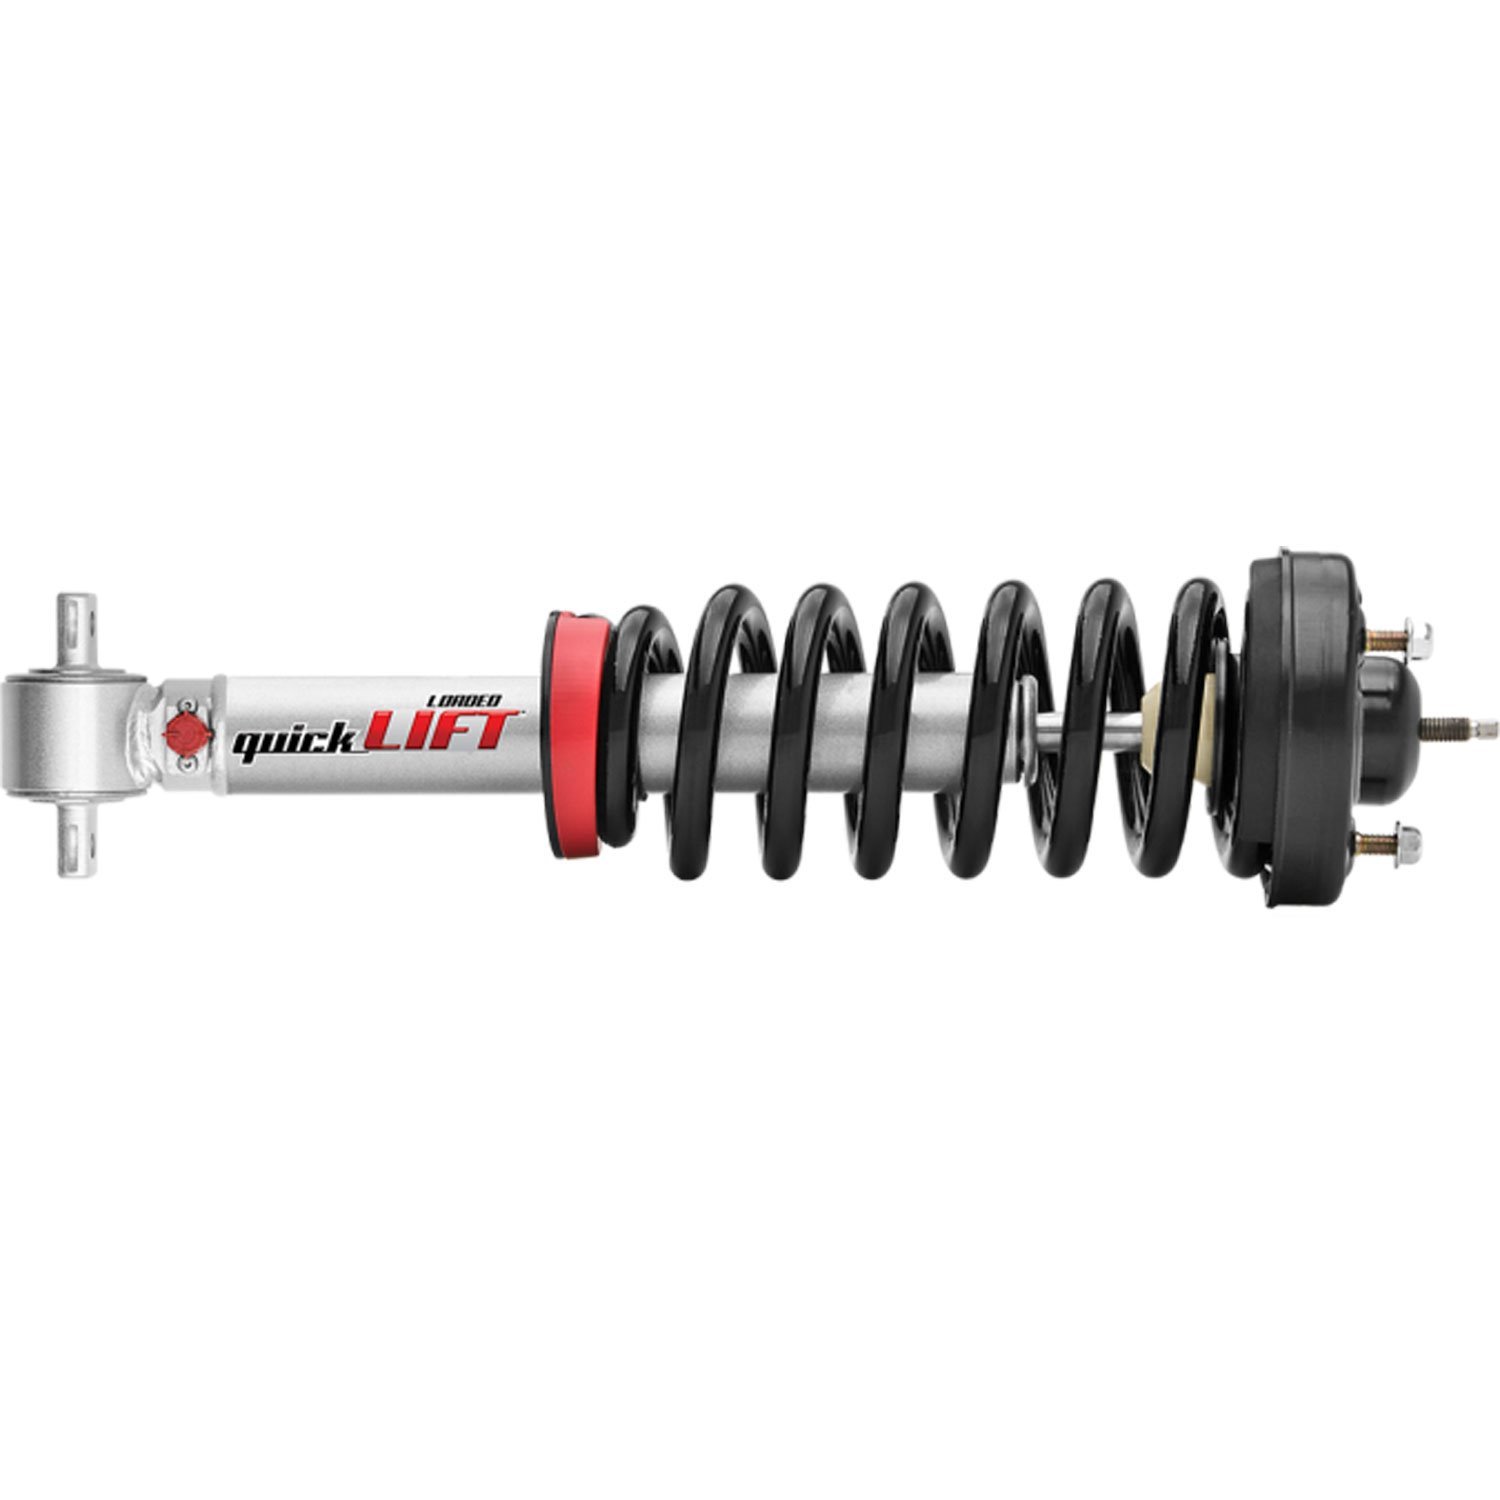 QuickLift Complete Strut Assembly Fits Chevy Avalanche, Suburban, Tahoe, GMC Yukon and Yukon XL